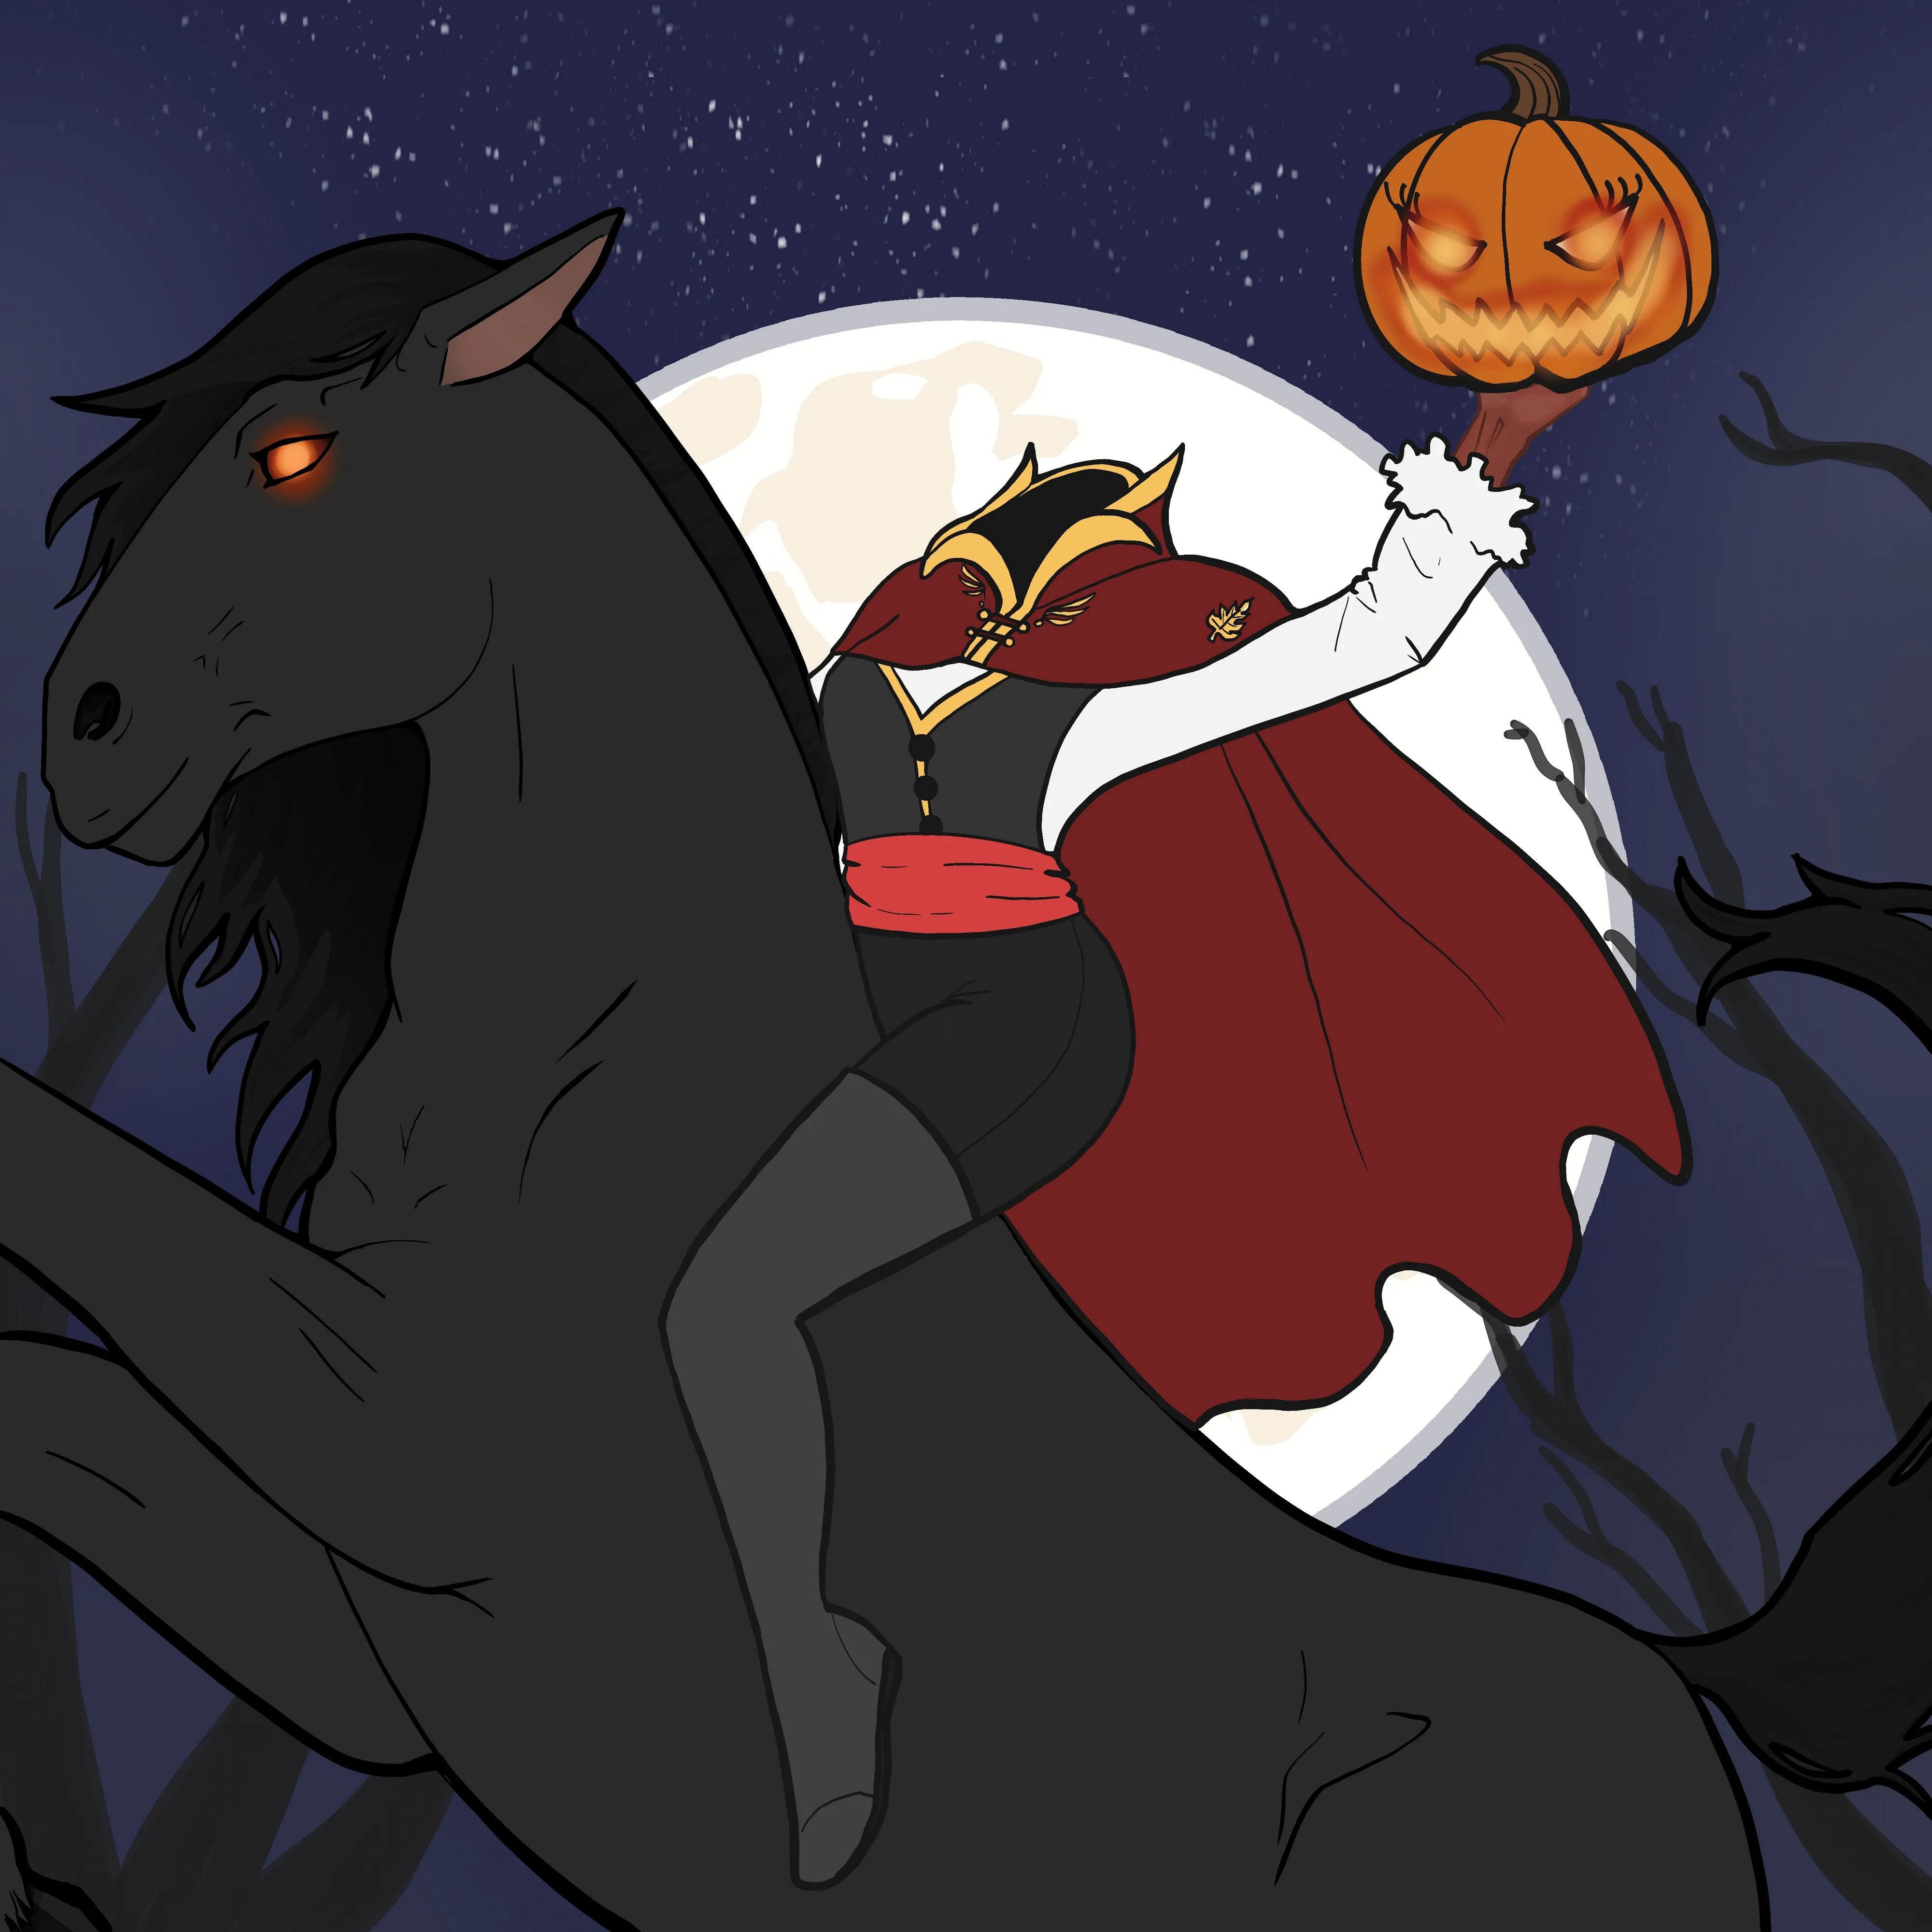 Happy Halloween from Girls Riding Things!